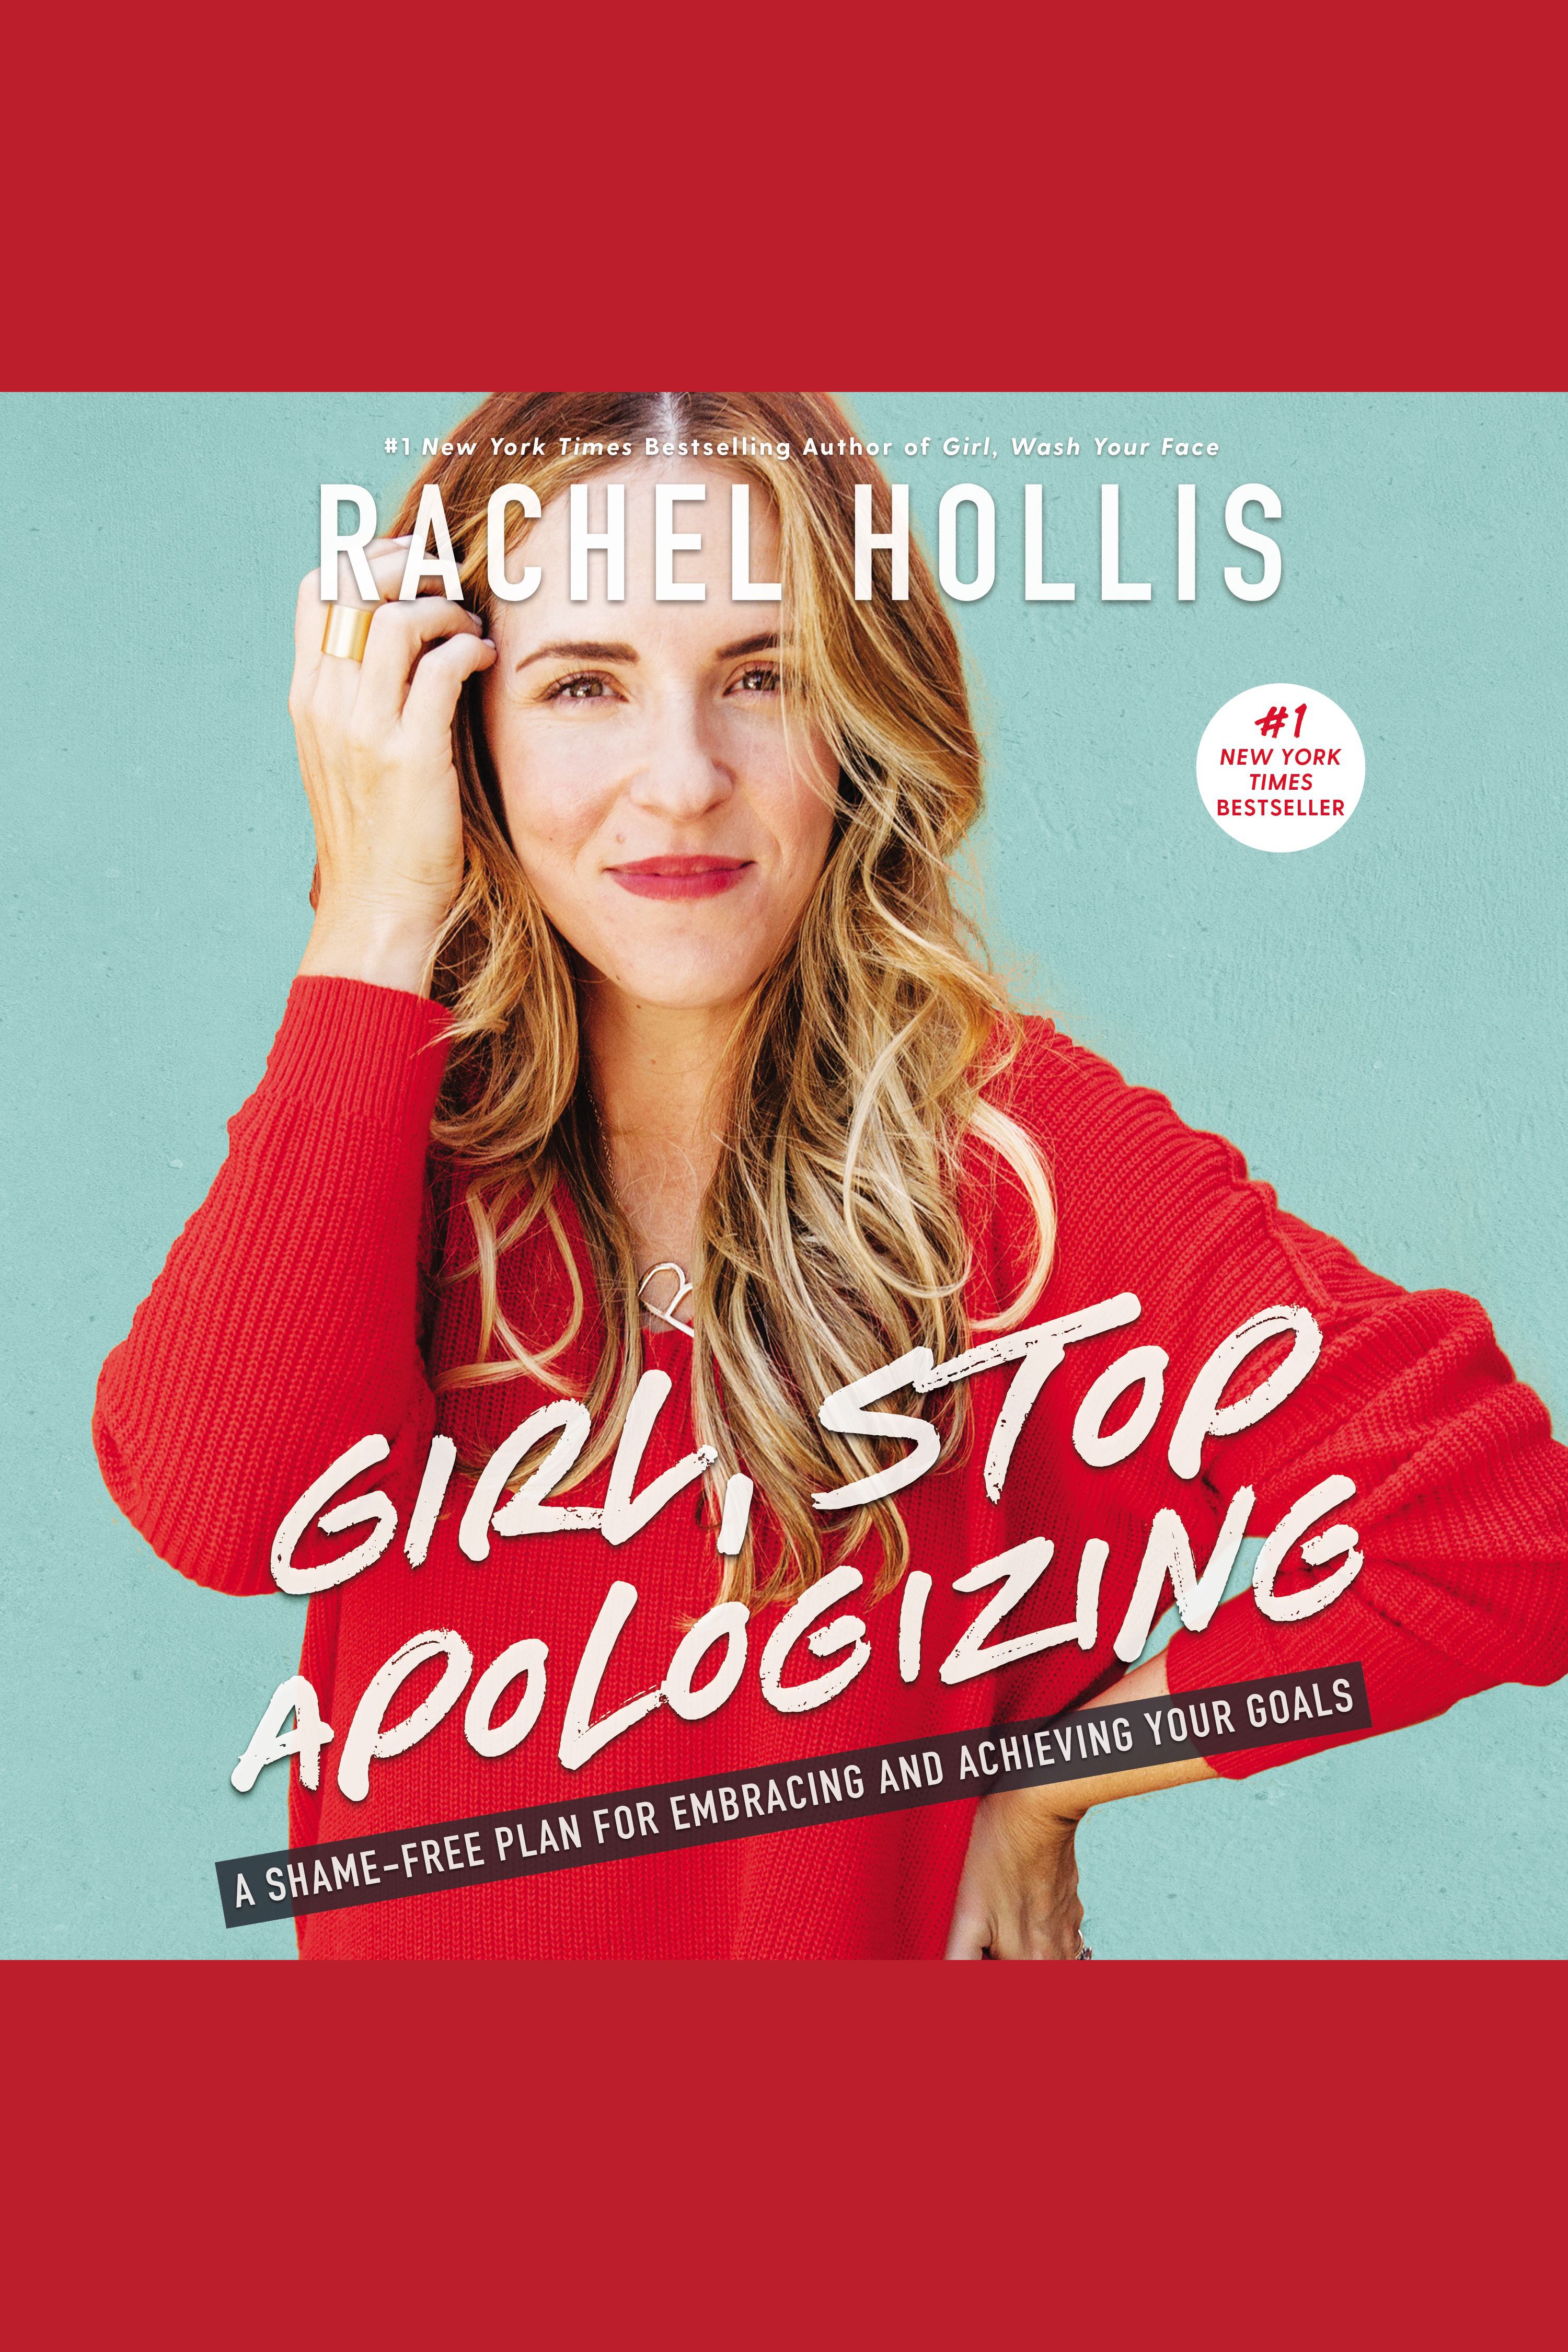 Girl, stop apologizing a shame-free plan for embracing and achieving your goals cover image